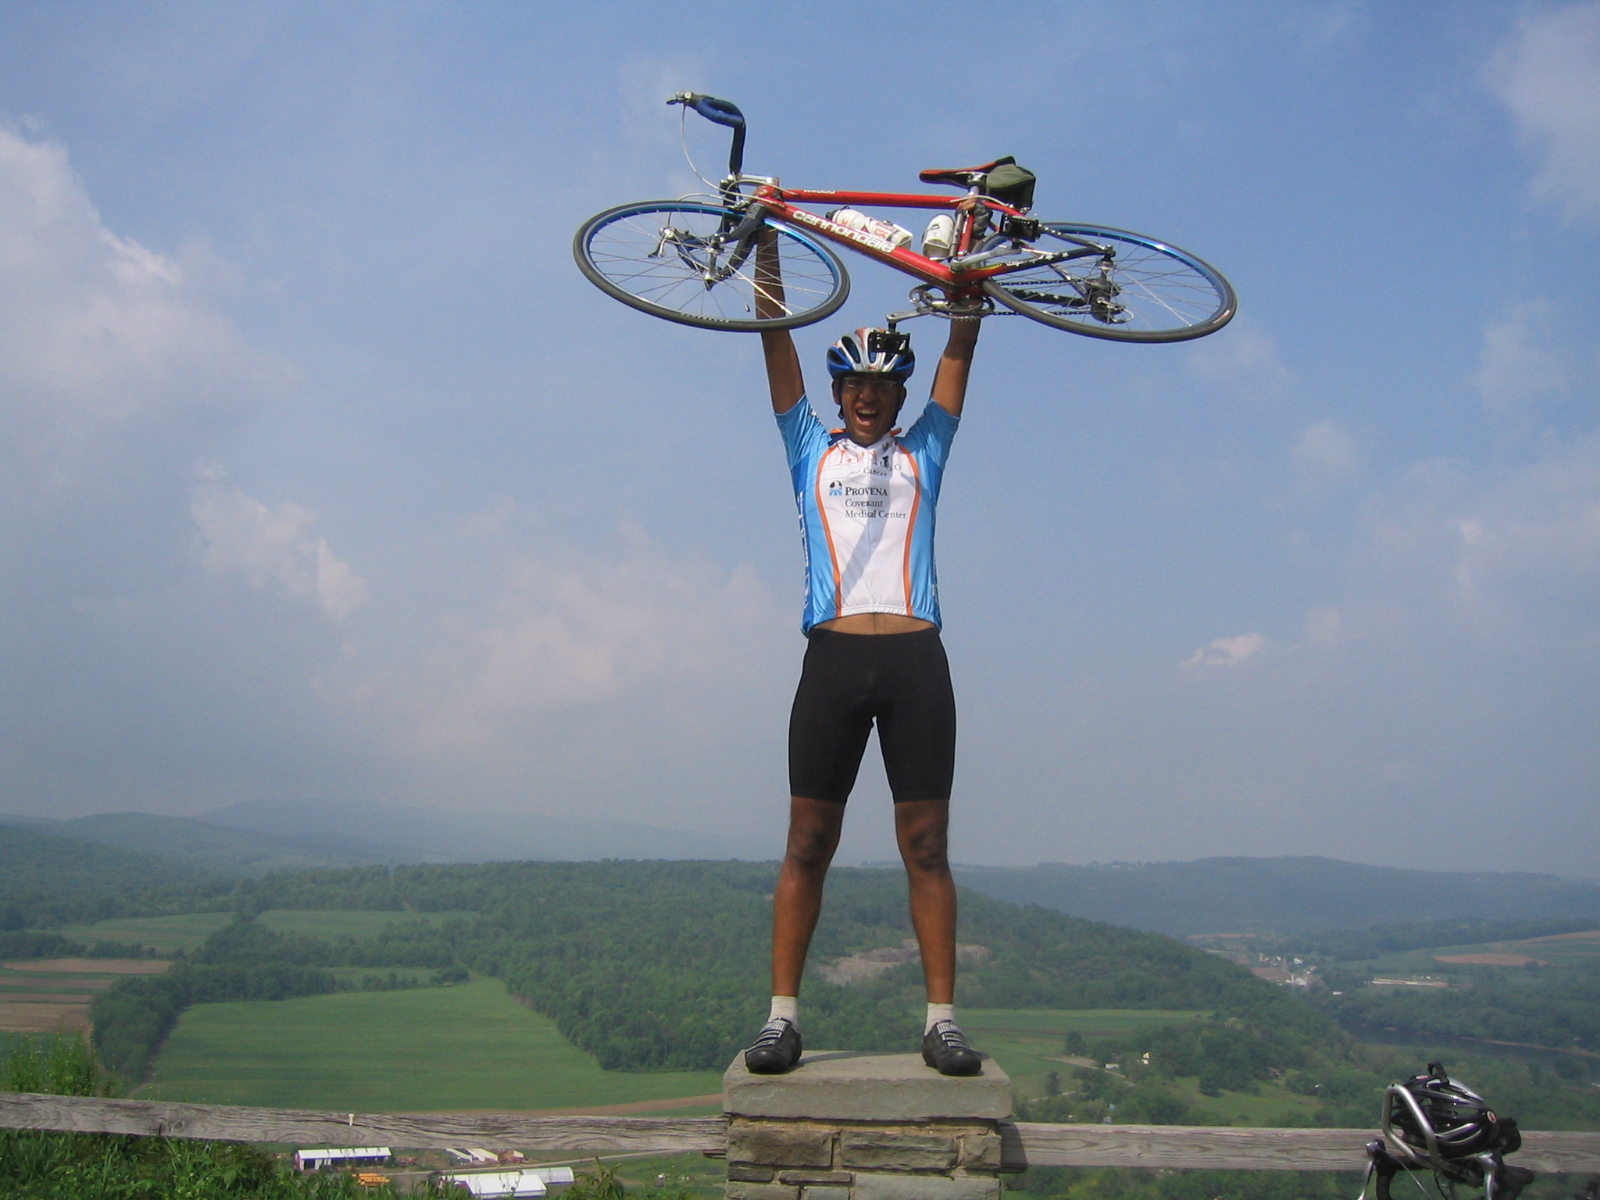 Anish Thakkar shares a victorious moment during the inaugural ride in 2007. (Photo courtesy of Anish Thakkar.)